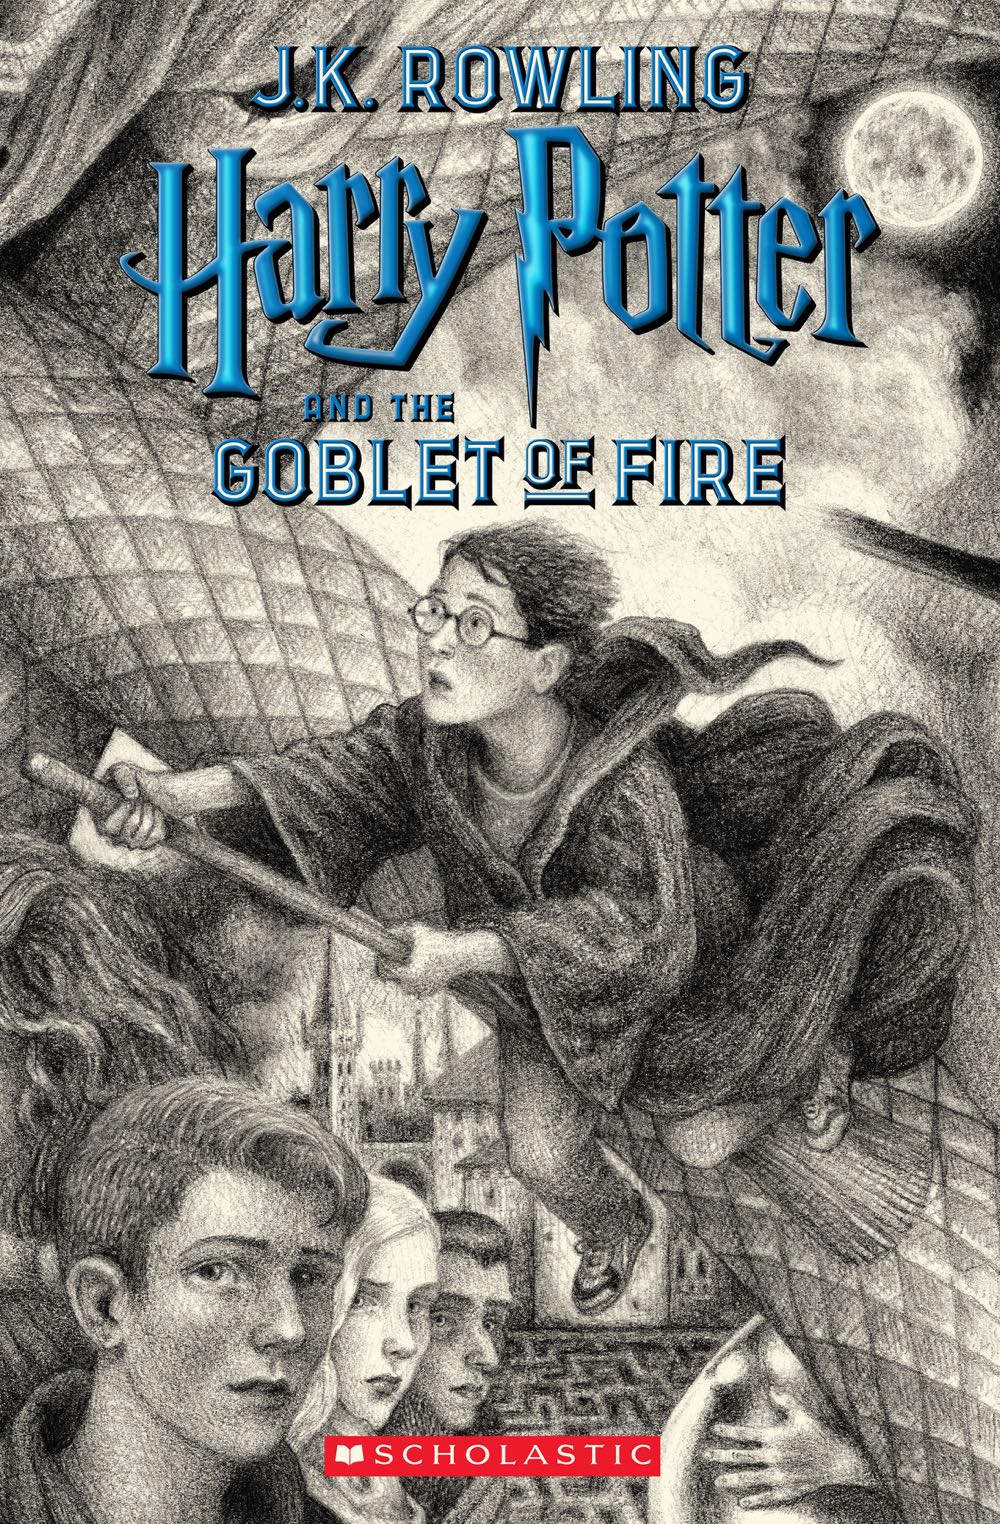 Harry Potter and the Goblet of Fire - J. K. Rowling (Arthur A. Levine Books / Scholastic Press - Hardcover) book collectible [Barcode 9780439139595] - Main Image 4